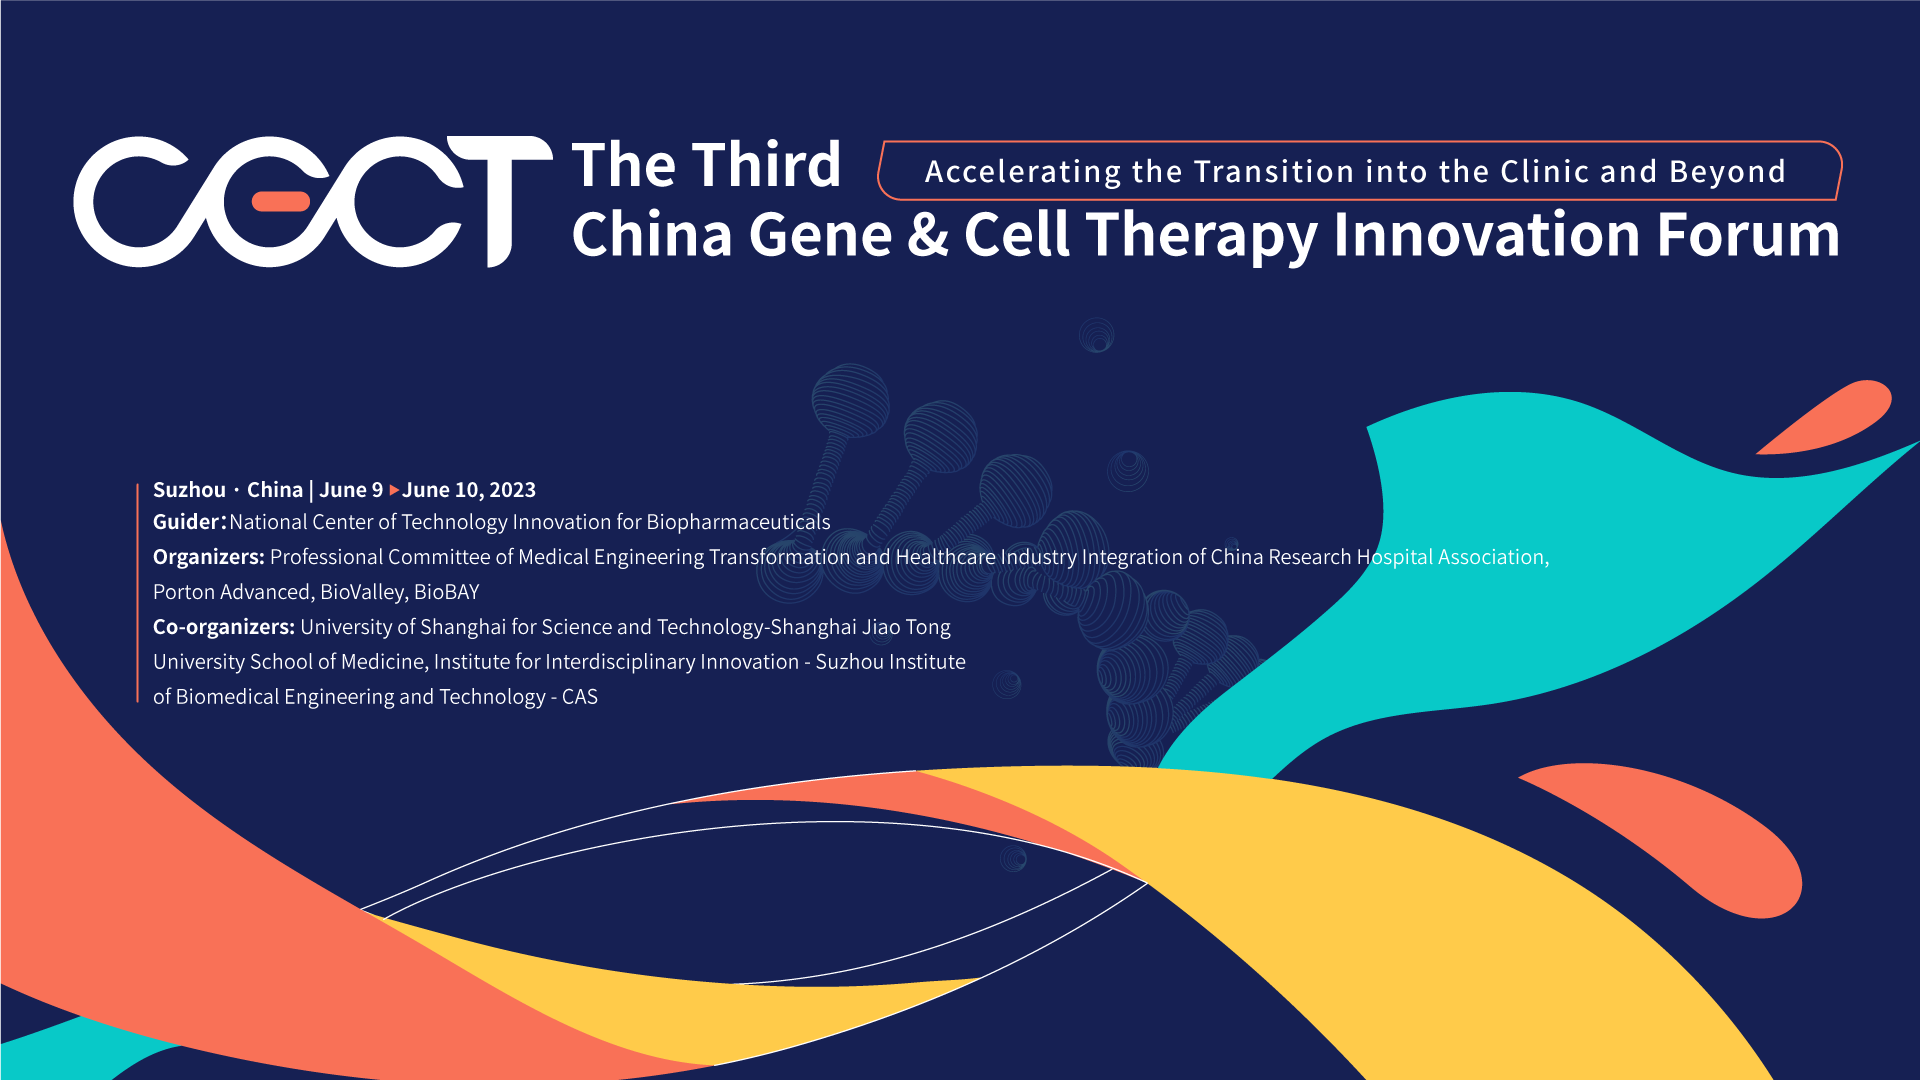 The Third China Gene & Cell Therapy Innovation Forum